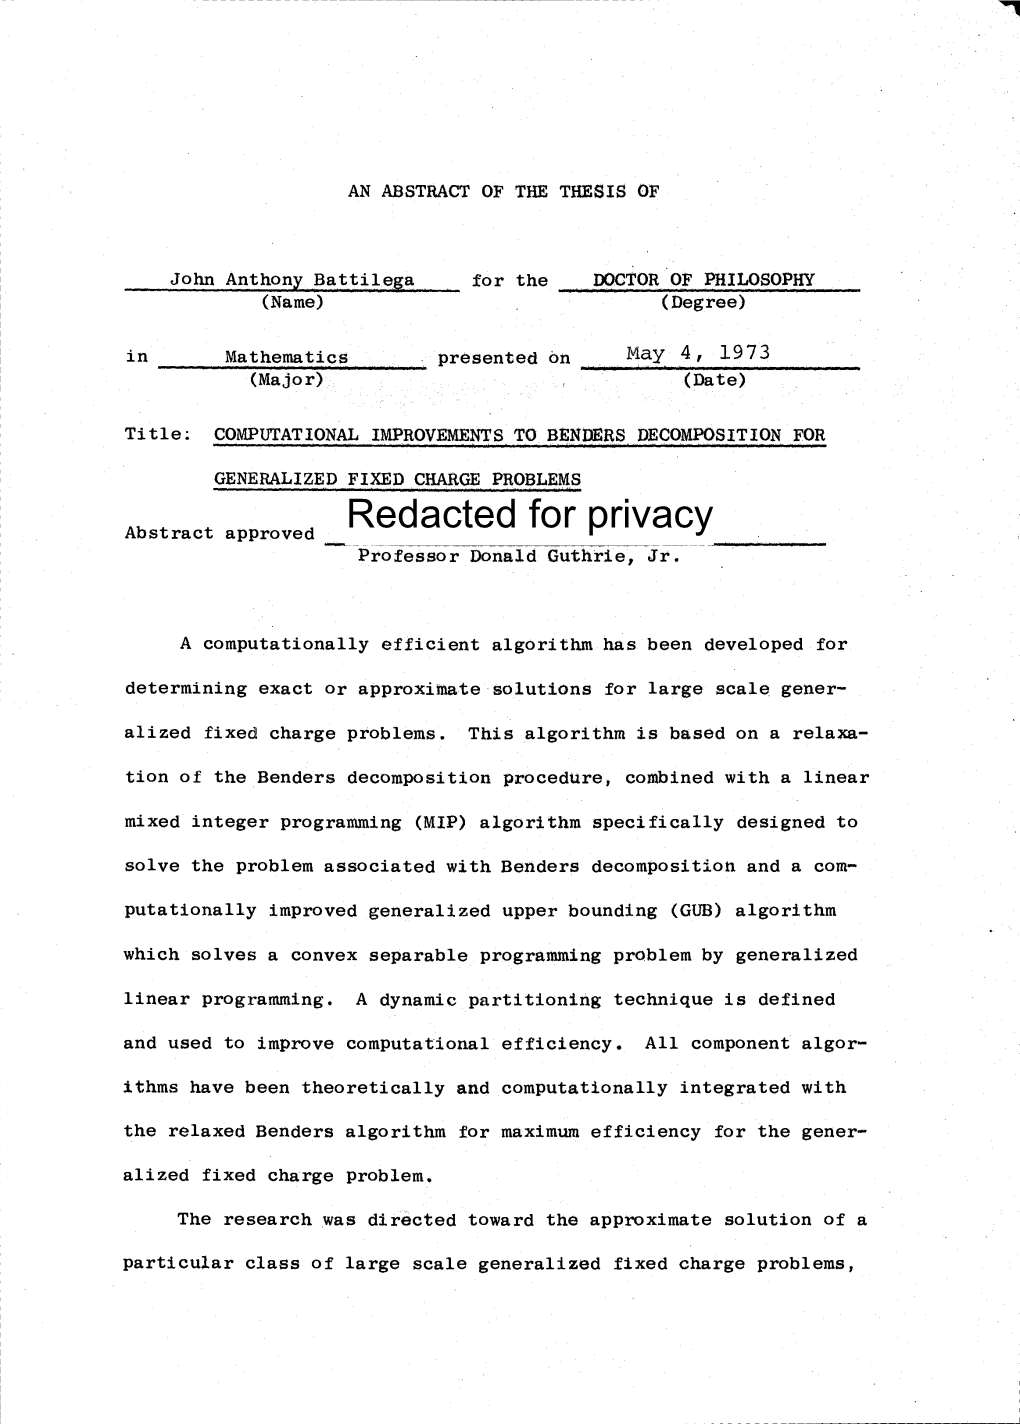 Redacted for Privacy Professor Donald Guthrie, Jr